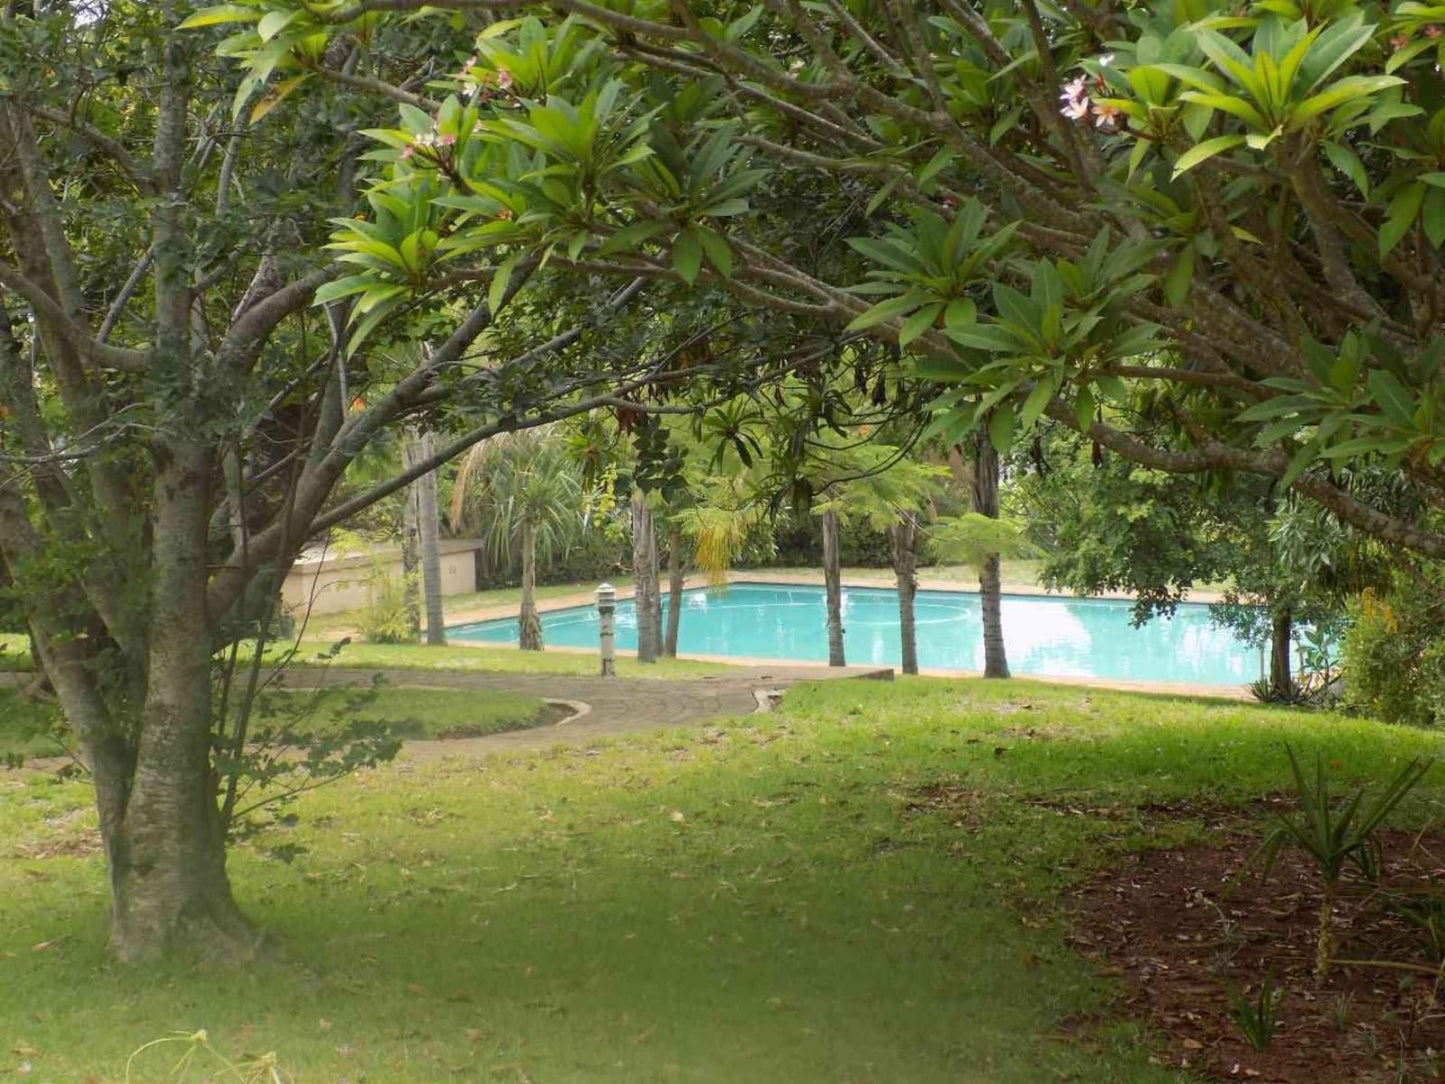 Eagles Nest Chalets Hazyview Mpumalanga South Africa Palm Tree, Plant, Nature, Wood, Tree, Garden, Swimming Pool